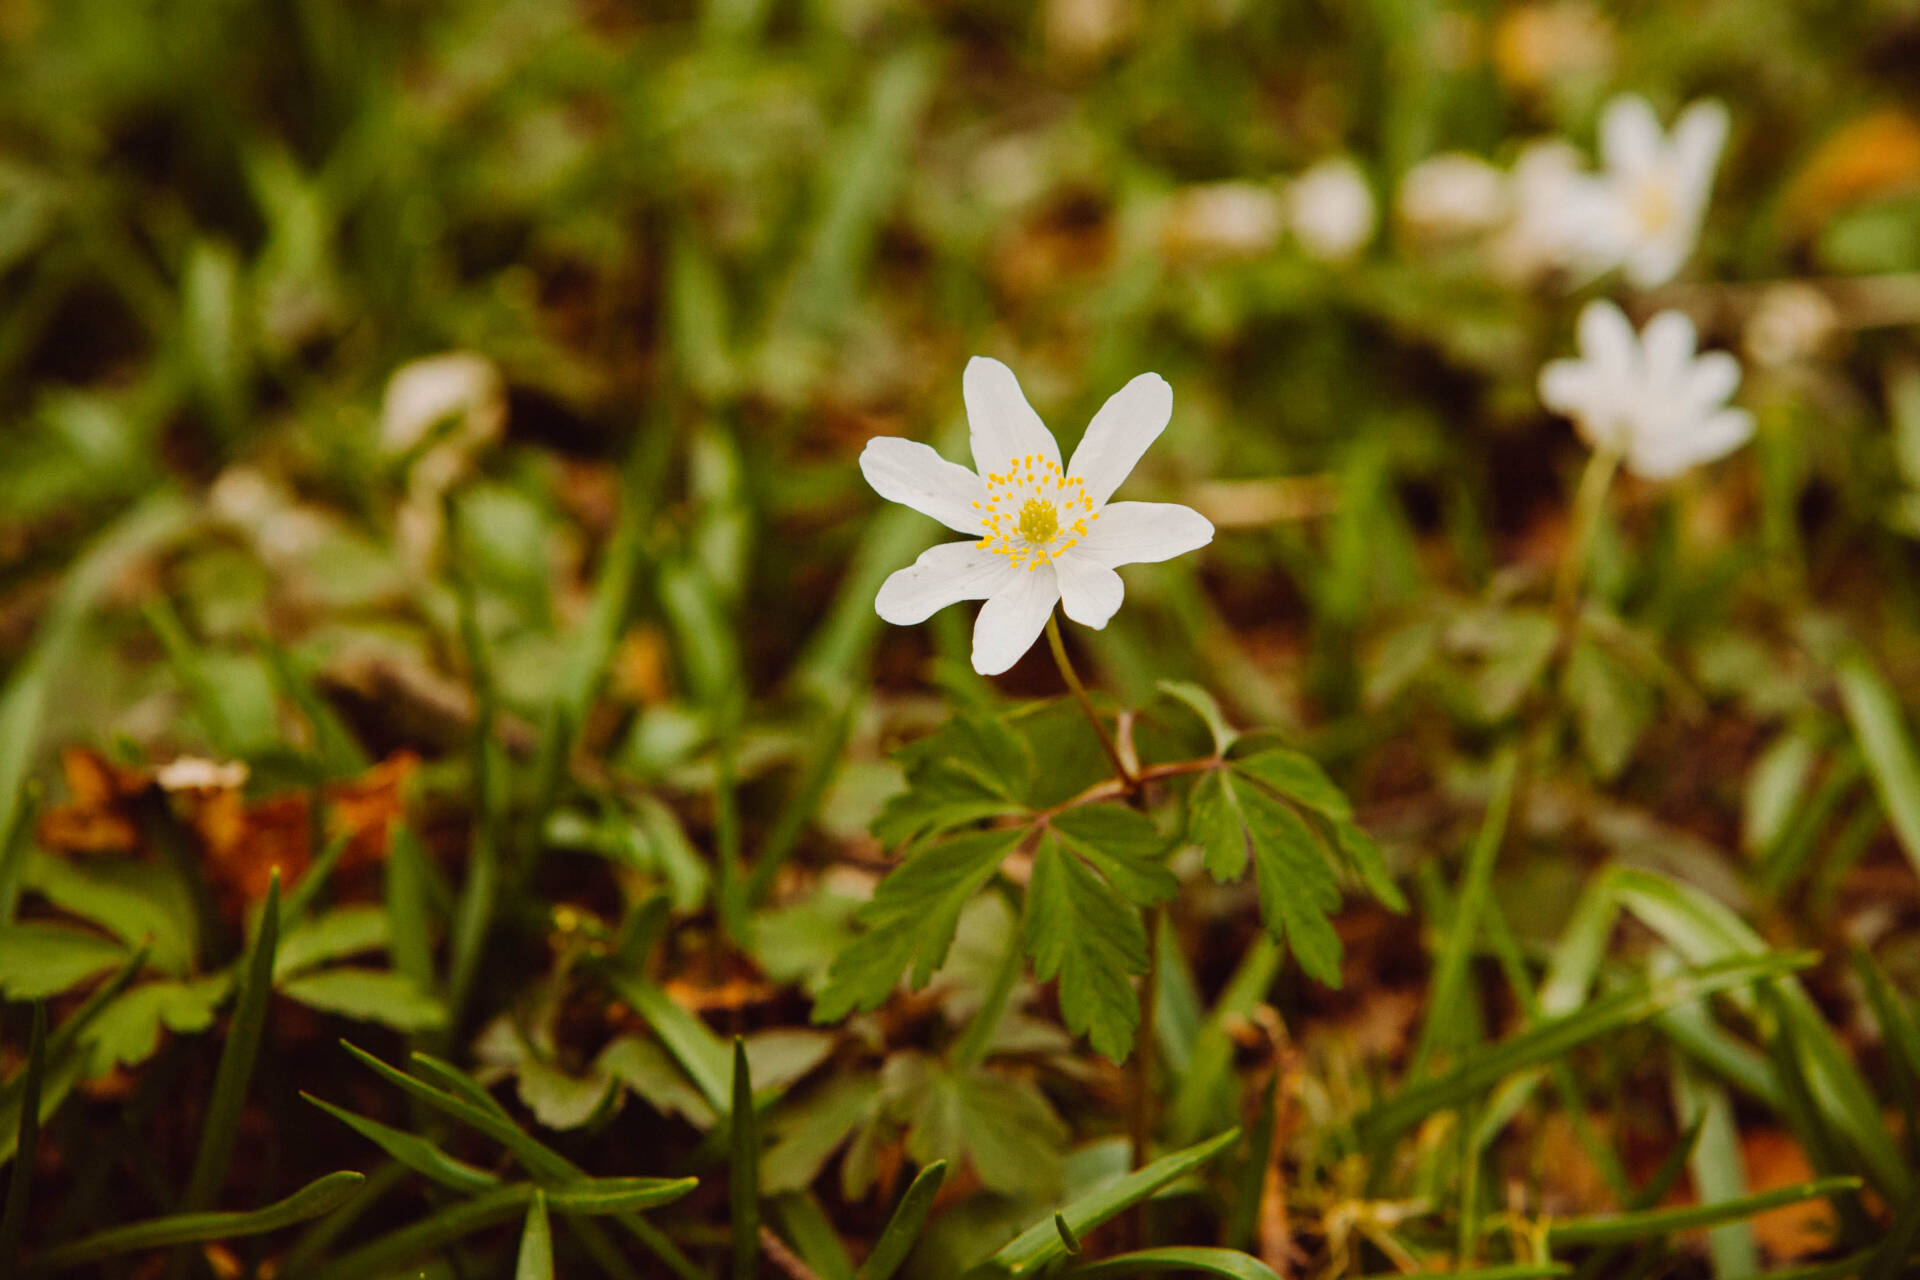 A white flower, with flowers and leaves in the background.